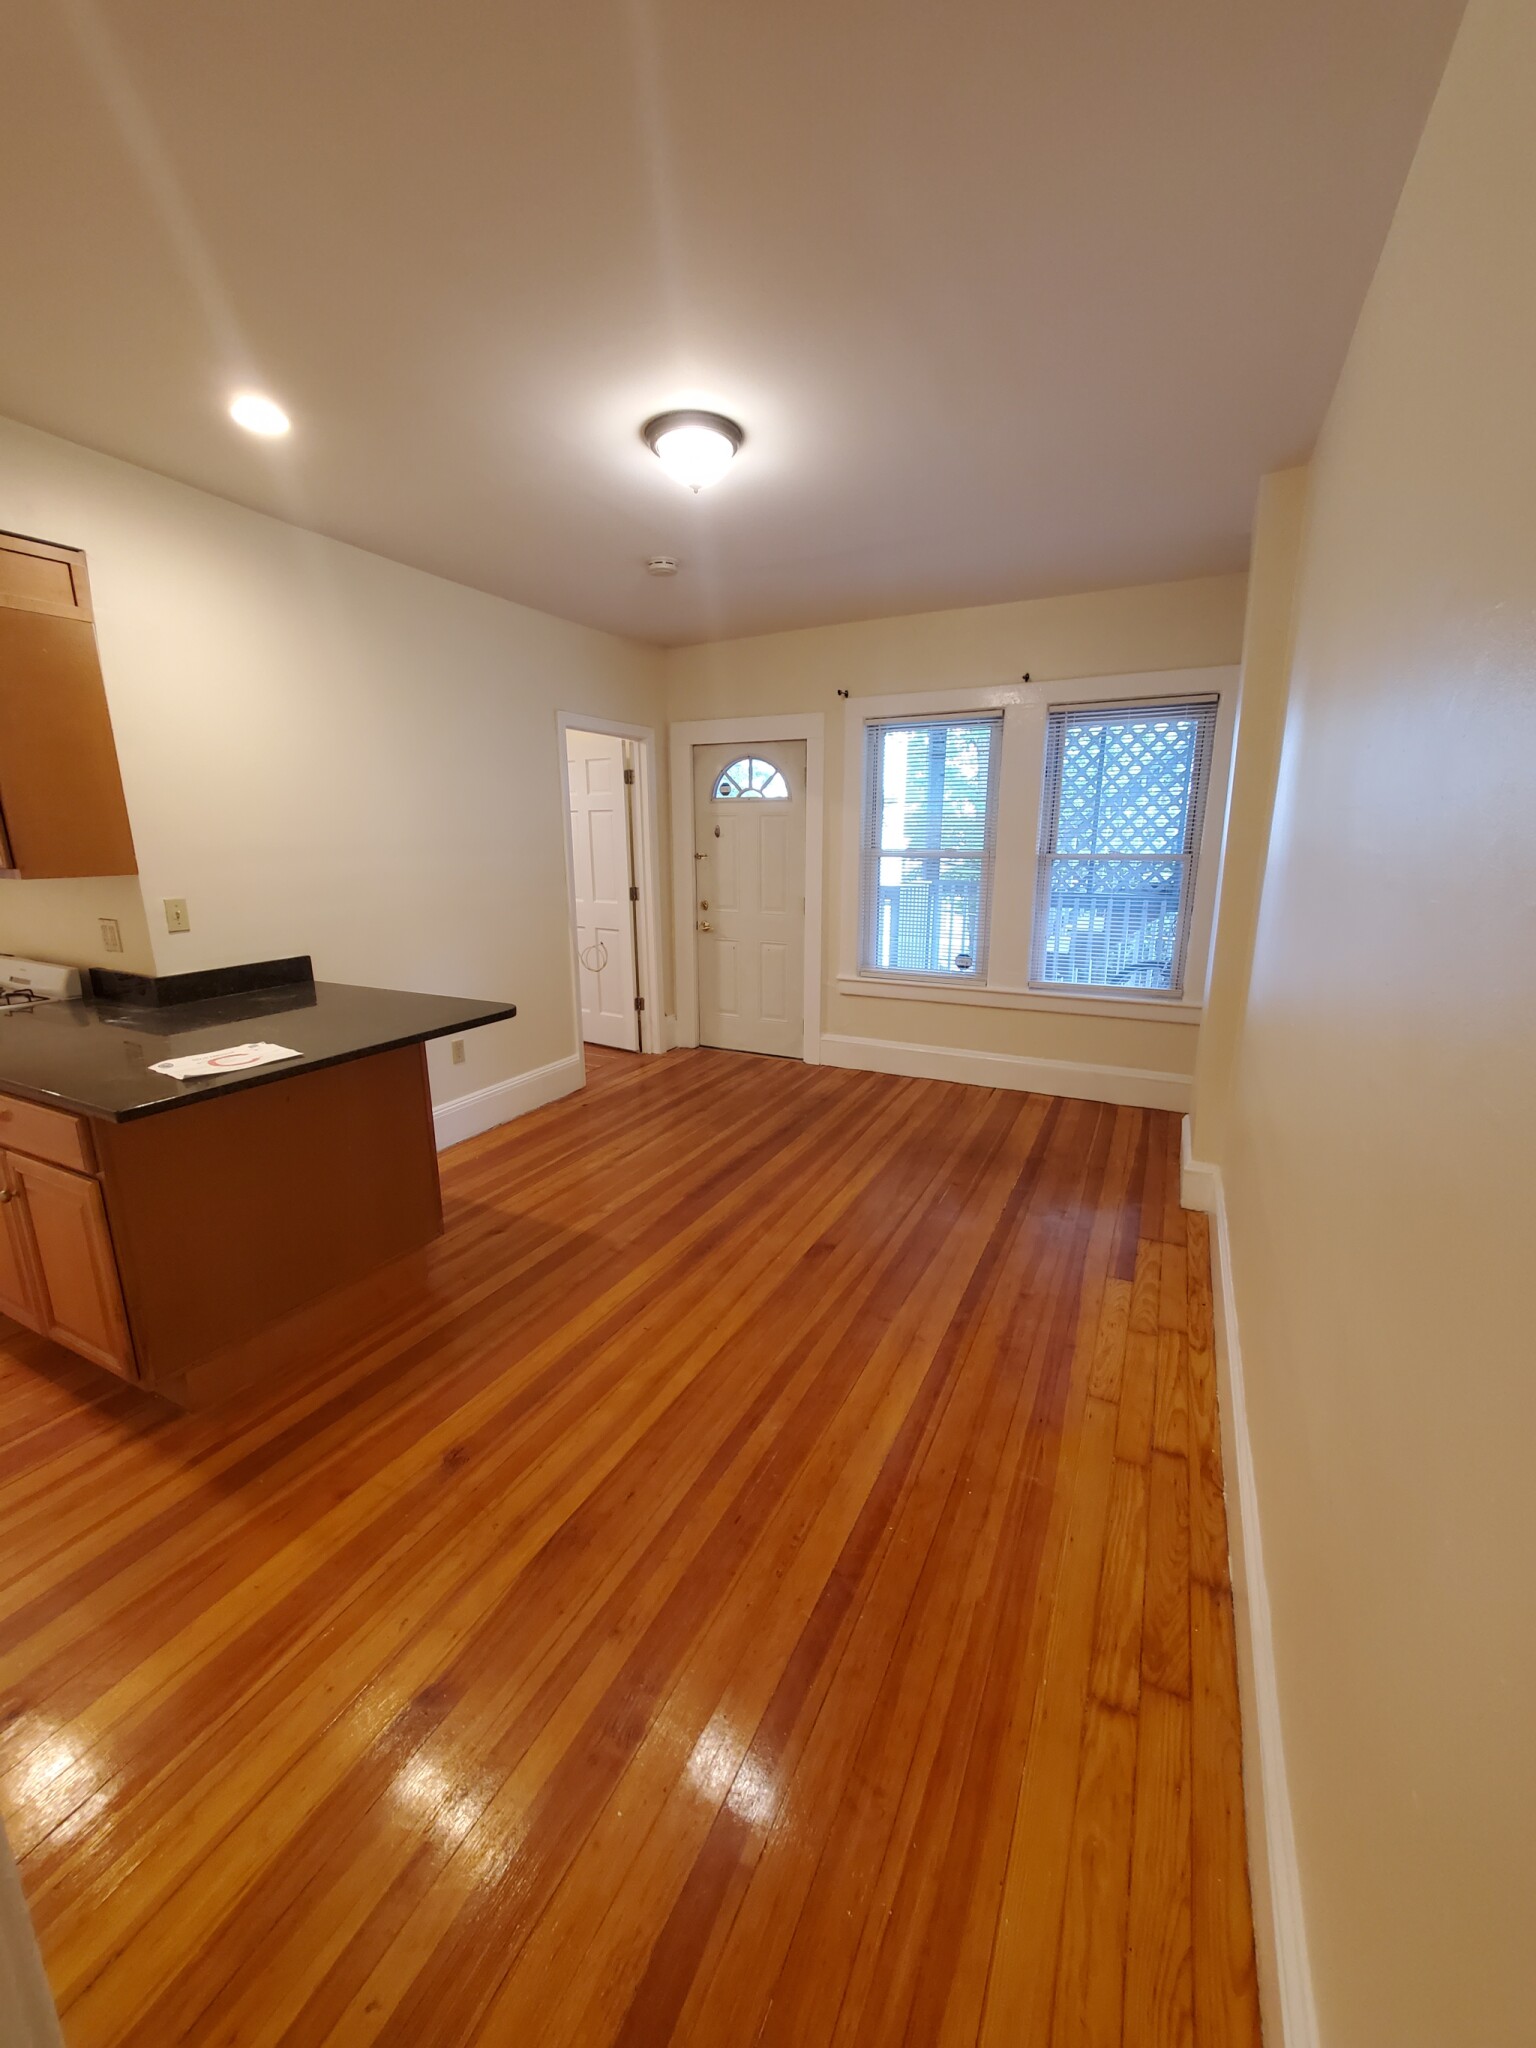 Photos of apartment on Richdale Ave.,Cambridge MA 02140